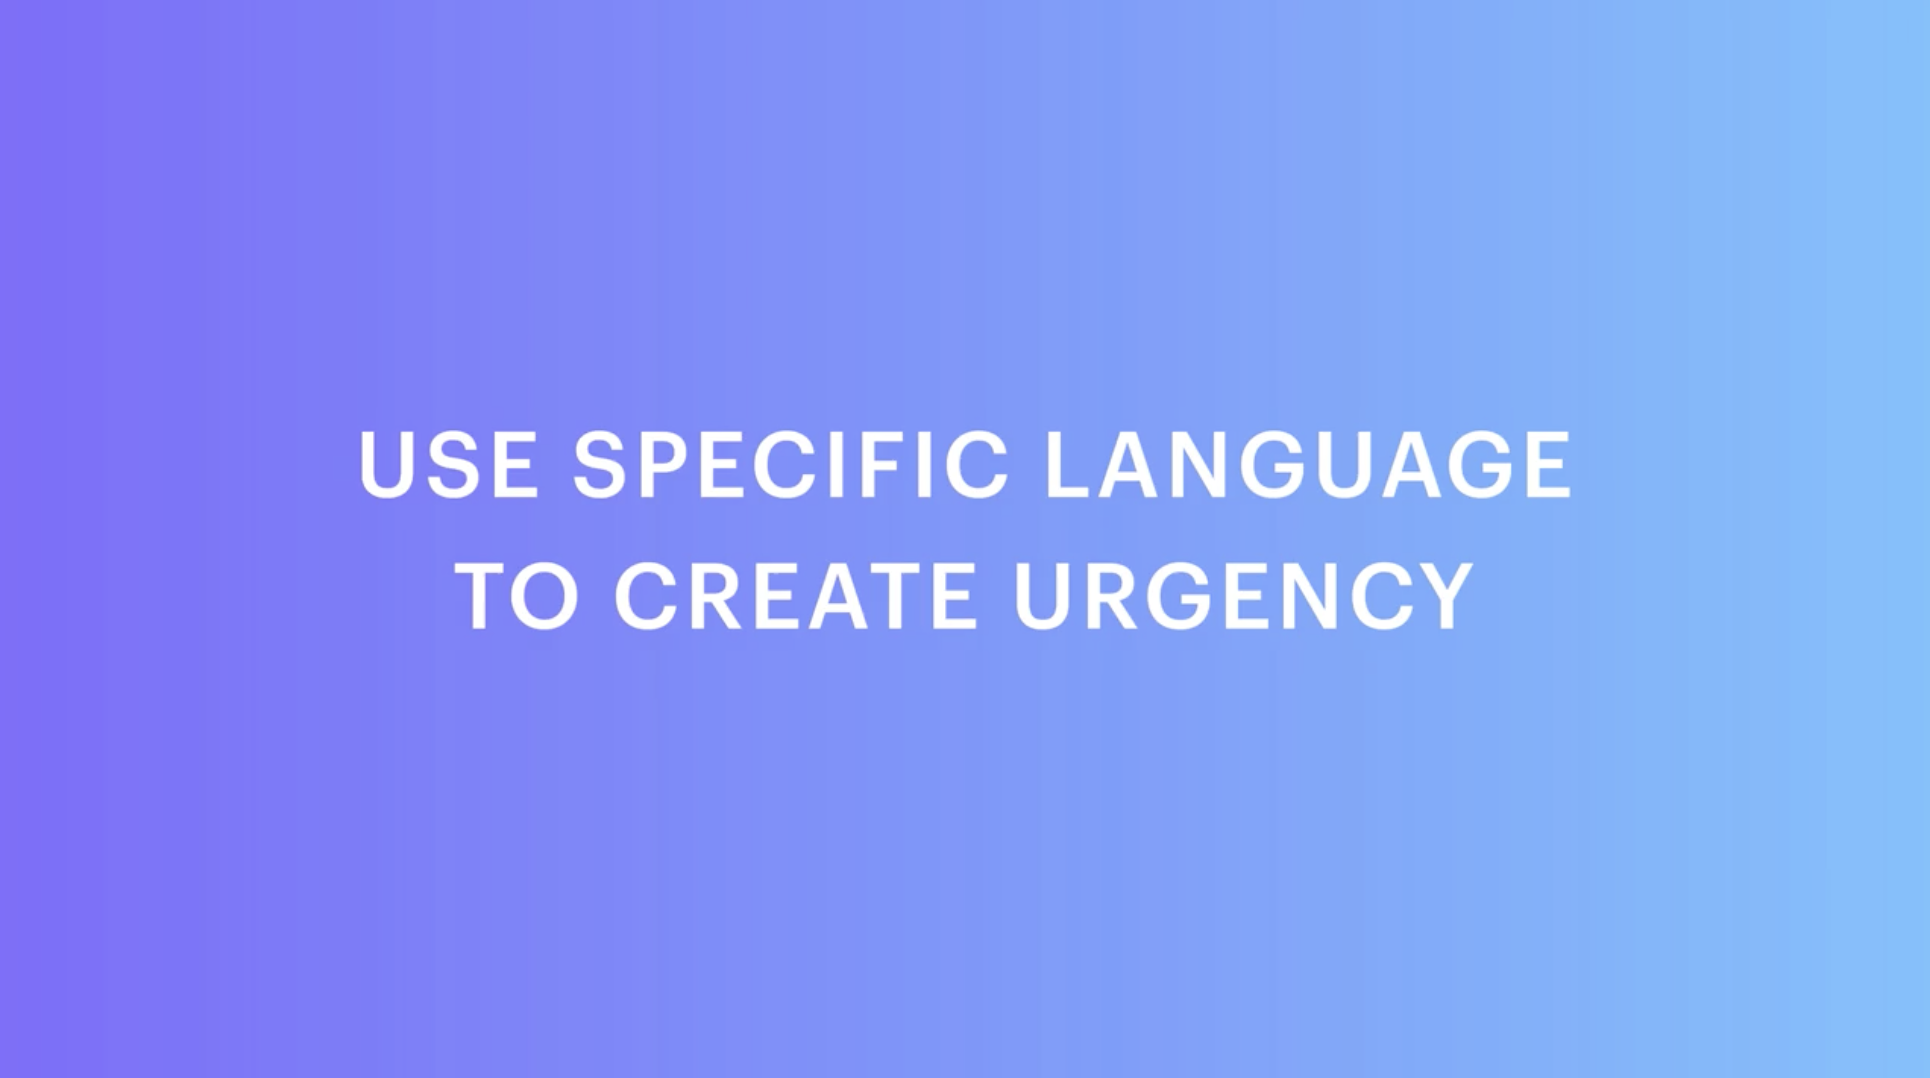 Use specific language to create urgency in emails